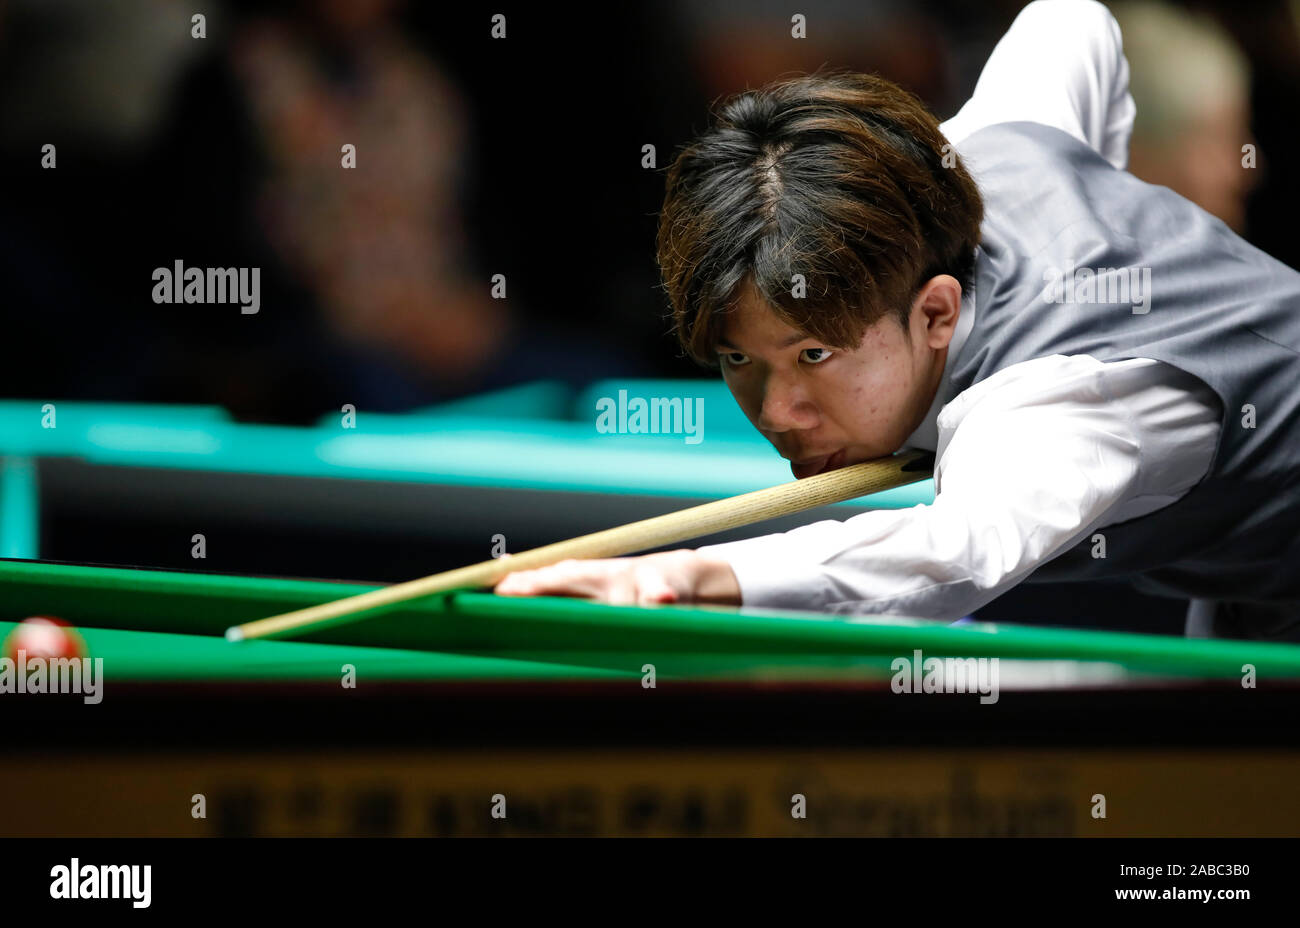 York. 26th Nov, 2019. Lei Peifan of China competes during the Snooker UK Championship 2019 first round match with Stuart Bingham of England in York, Britain on Nov